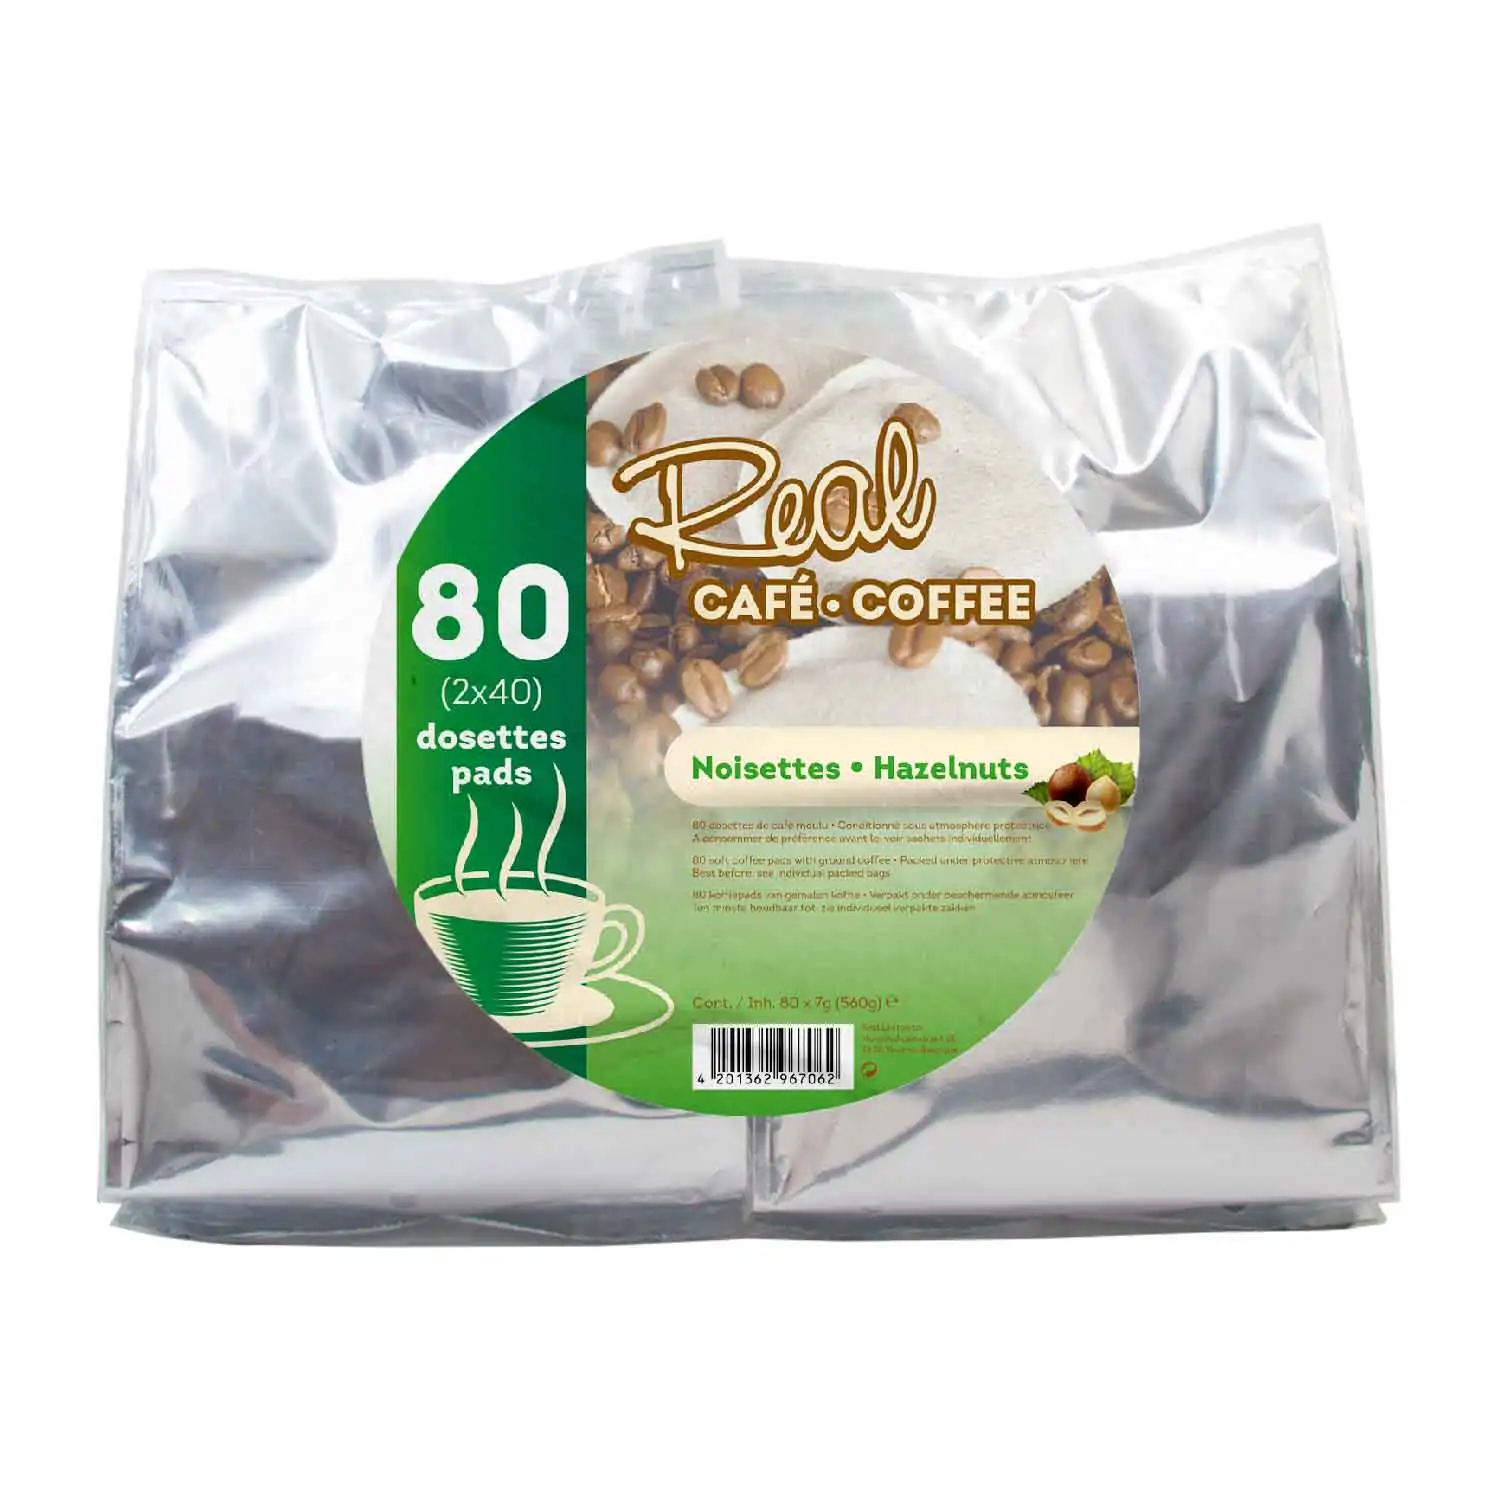 Real coffee hazelnuts 2x40 pads - Buy at Real Tobacco